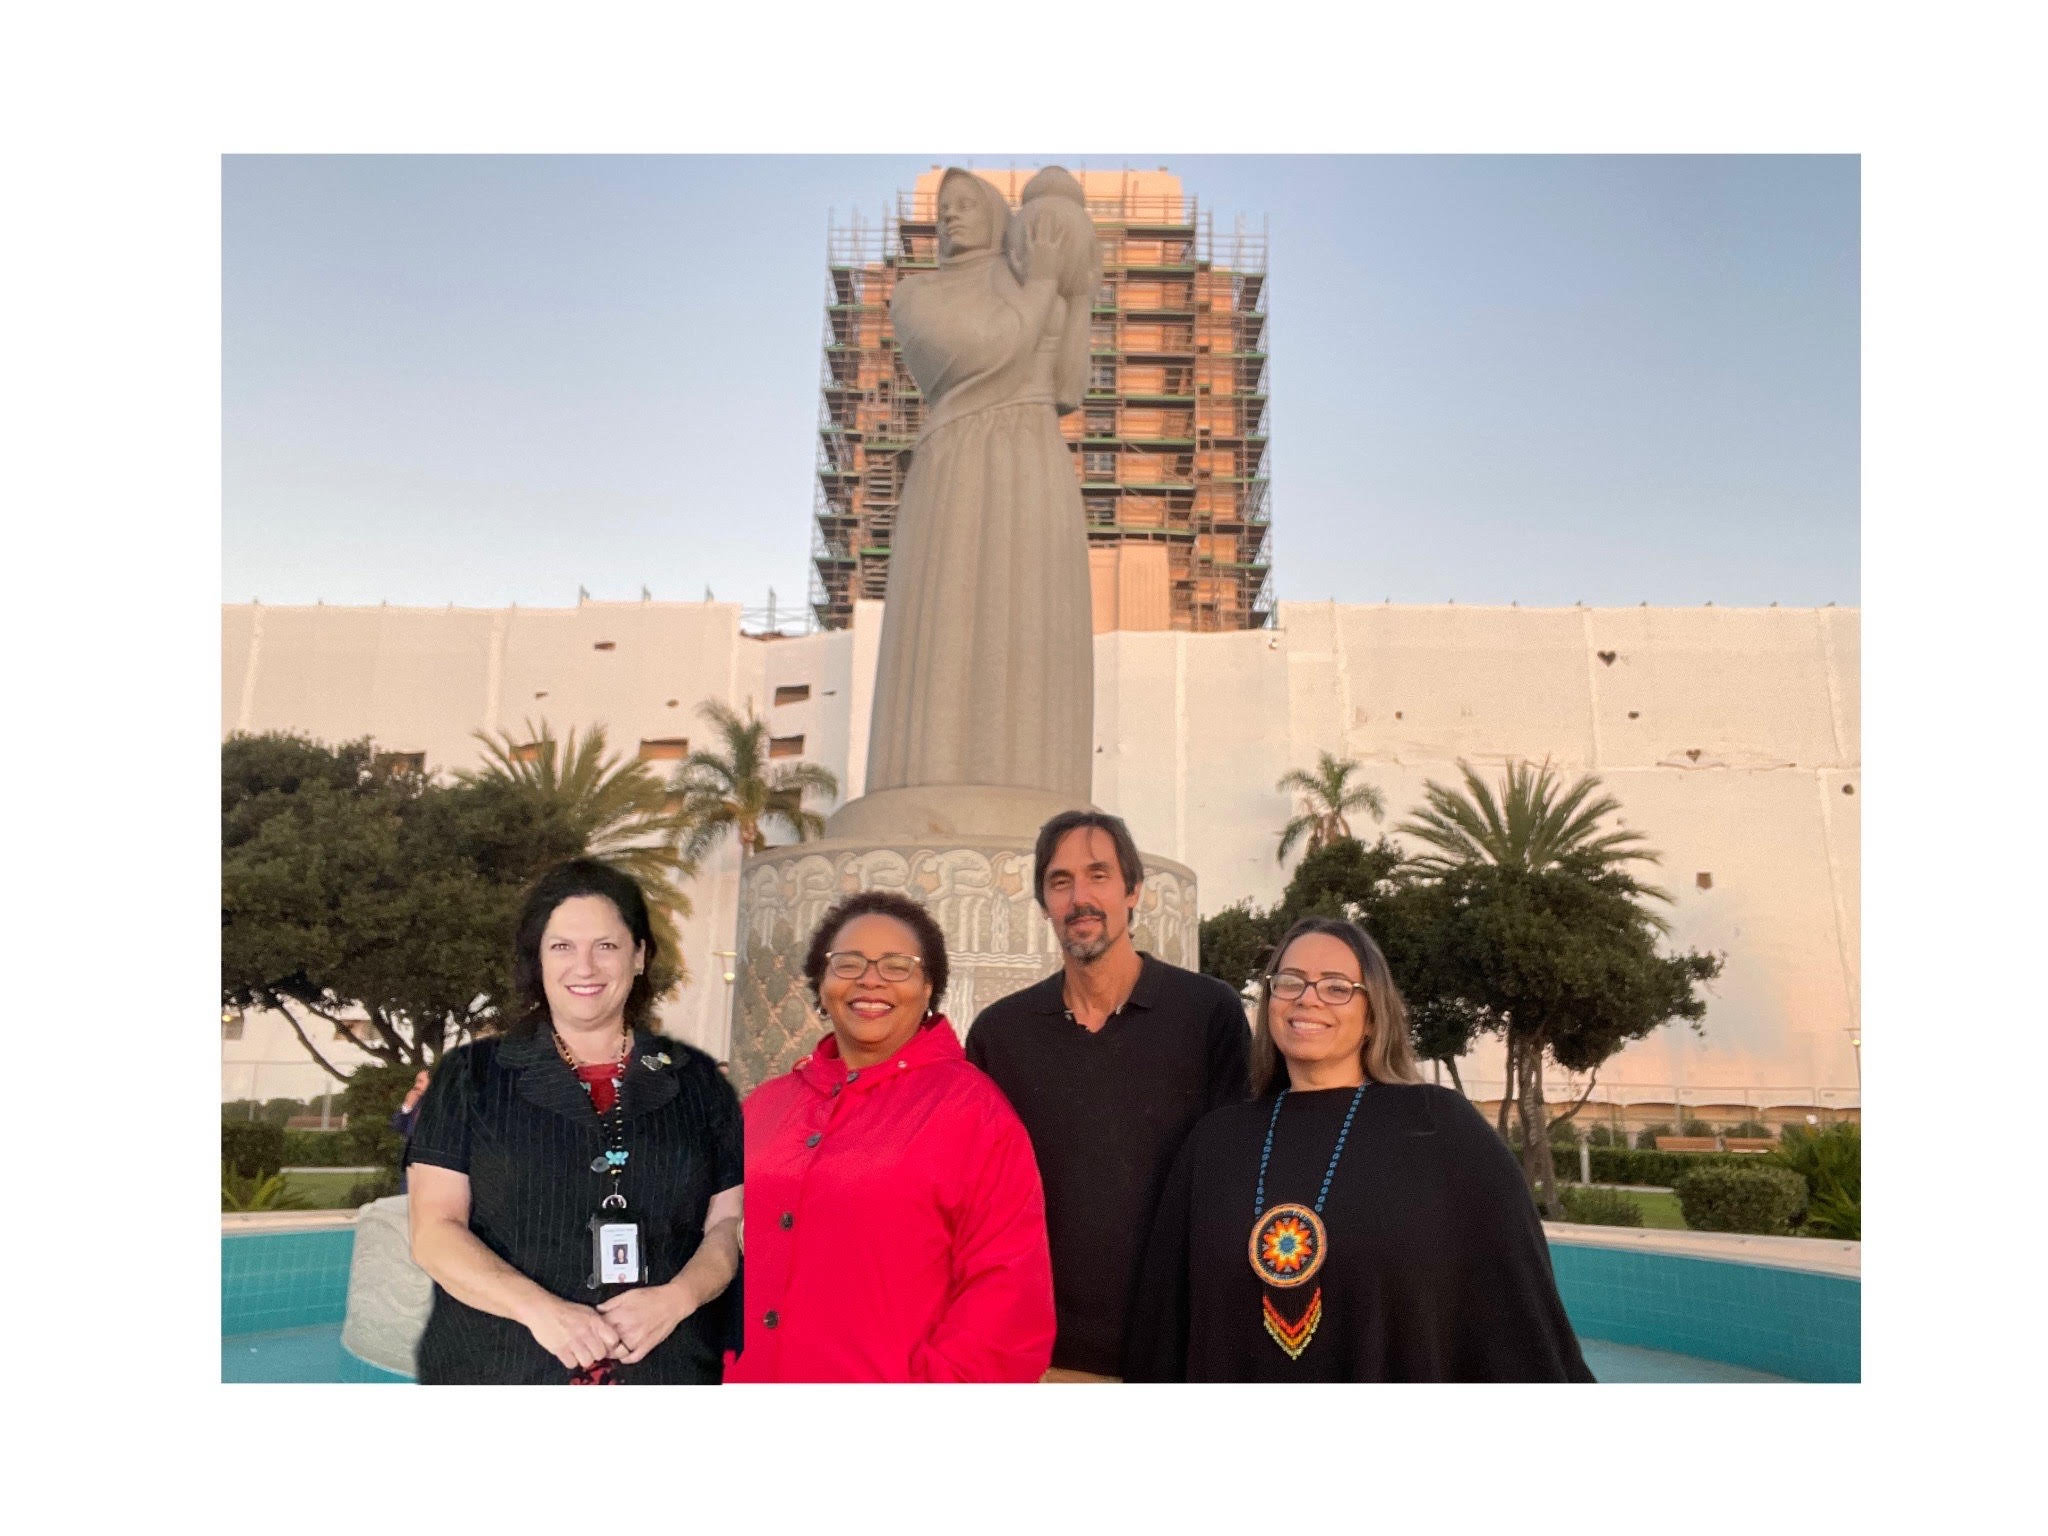 Maria Whitehorse stands beside three other activists in front of a giant statue of a woman holding an olla in front of the San Diego County Administration Building. Credit: Maria Whitehorse.